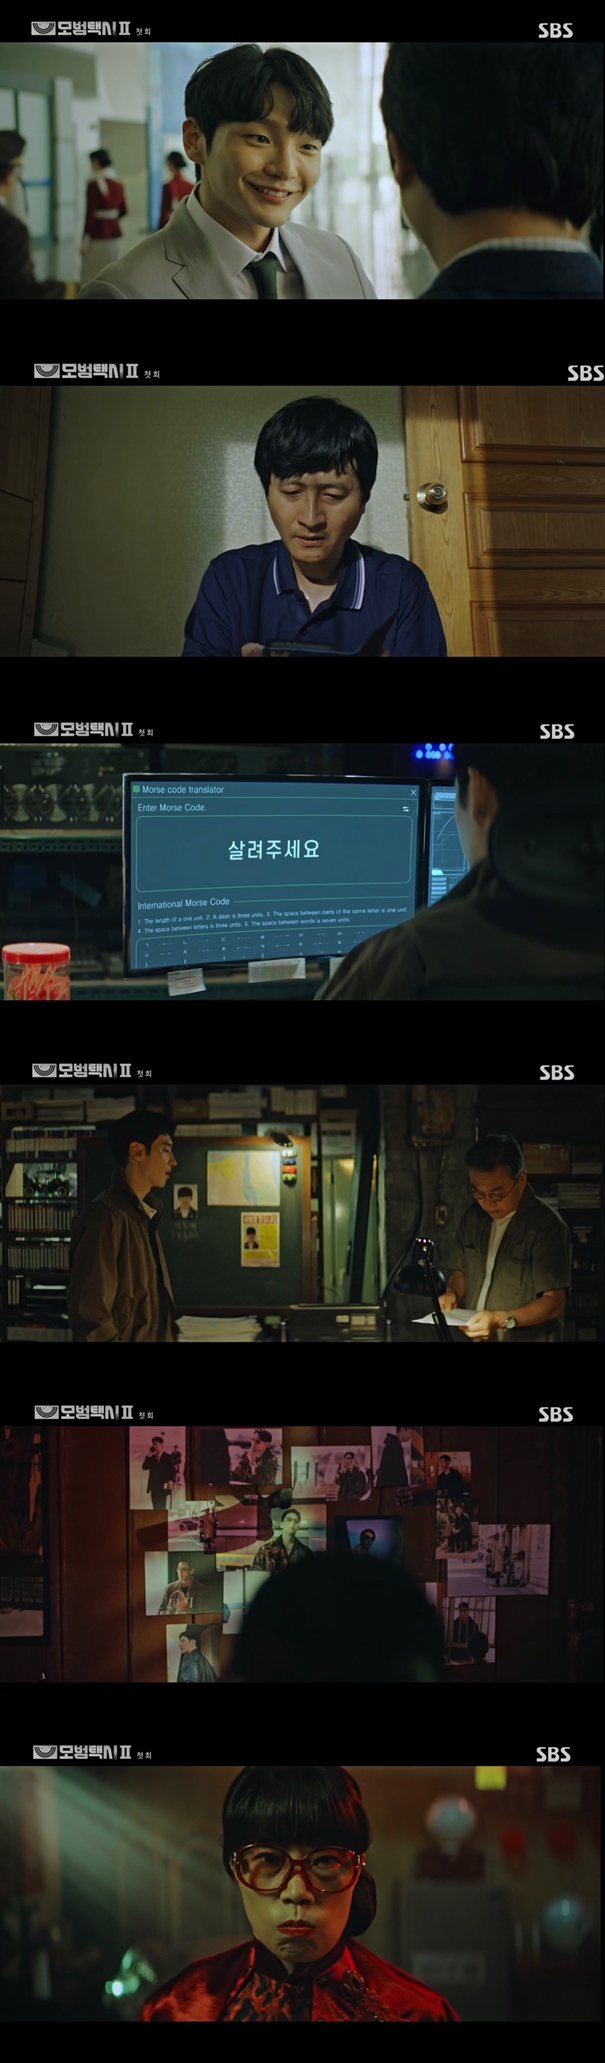 In SBS Friday-Saturday Drama The Good Detective aired on the 17th, Kim do-gi (Lee Je-hoon) and CEO Jang (Kim Ui-seong) were in charge of the case of their father who asked for the disappearance of a 25-year-old son.Kim do-gi made his first appearance in prison with his long hair covered in snow. Kim do-gi was transferred to a convoy bus with three fellow prisoners, who turned out to be digital Illegal sexual exploiters.The kim do-gi made them lose their minds and put them in one place, and the prisoners became jailbreakers who assaulted the guards and took weapons. They were suppressed by the police and returned to prison.Two years ago, The Rainbow Unfortunate, Ko Un (Pyo Ye-jin), Choi Joo-im (Jang Hyuk-jin) and Park Joo-im (Bae Yu-ram) were scattered after the last job.When they disappeared, the police came in, and Kim Ui-seong turned everything over and Kim do-gi remained by his side.The missing son, who was concerned about Ko Un, tried to make an extreme attempt at the Han River Bridge, but contacted him when he saw The Good Detective business card under his feet.When he was contacted, he asked Kim do-gi for help with the beeper and started running The Good Detective to handle the case. The client met kim do-gi and told him everything.The missing son Dongjae s father was a businessman in Chicken s house, and one day he was dressed up as an exchange student for two years.After a while, however, my father found out that Dongjae had gone to make money by renting a chicken house and taking a leave of absence from college. My father contacted Dongjae by letter and headed to Vietnam where he was son.My father told me that he went to the place where he worked, but there was nothing and he made a strange call saying Im sorry. After that, the Police told my father, The last time we spoke, we immediately asked.Your son called the embassy himself and said, Please do not look for it anymore. As long as the adult person refuses to contact us, there is nothing we can do. When he returned home, his father confirmed a letter similar to the sons suicide note, and the Police said, The place where your son contacted was a foreign illegal gambling house.Kim do-gi said, But it is not his will. At the bottom, he probably left it because it looked like graffiti. Dong-jaes position in the military was a communications soldier. He must have been familiar with Morse code.As a result, the hidden meaning of Morse code turned out to be Save me.As you can see, Dongjae was caught and tortured after being employed at the Illegal gambling place in Vietnam.Kim do-gi started an operation to rescue him, and kim do-gi worked directly at an overseas gambling center and started to Vietnam, but was kidnapped by questionable men.Opening his eyes, kim do-gi was hanging upside down, and was assaulted along with his co-workers by a man who appeared to be the kidnappers boss.At the end of the broadcast, Shim Sooung, who was drinking tea, plunged into a kim do-gi on the wall of a Chinese restaurant.On the other hand, Lee Yeong-ae has appeared as a narrator to guide The Rainbow Transportation Service from Season 1 of The Good Detective and has shown a calm and calm voice.Lee Yeong-ae also said, Hello, first of all, thank you for visiting The Rainbow The Good Detective. Let me give you some notes for your safety and convenience.The Taxi meter will be on while the commission is in progress. After all the referrals are terminated, the deferred payment will be settled, and in some cases additional premiums may be added. After using Taxi, you should not mention to others about The Rainbow Taxi.If you want to leave the request of The Good Detective, please press the blue button on the left side of the screen. If you do not want to leave it, press the red button on the right side of the screen. Please select it. Photo = SBS Broadcast screen